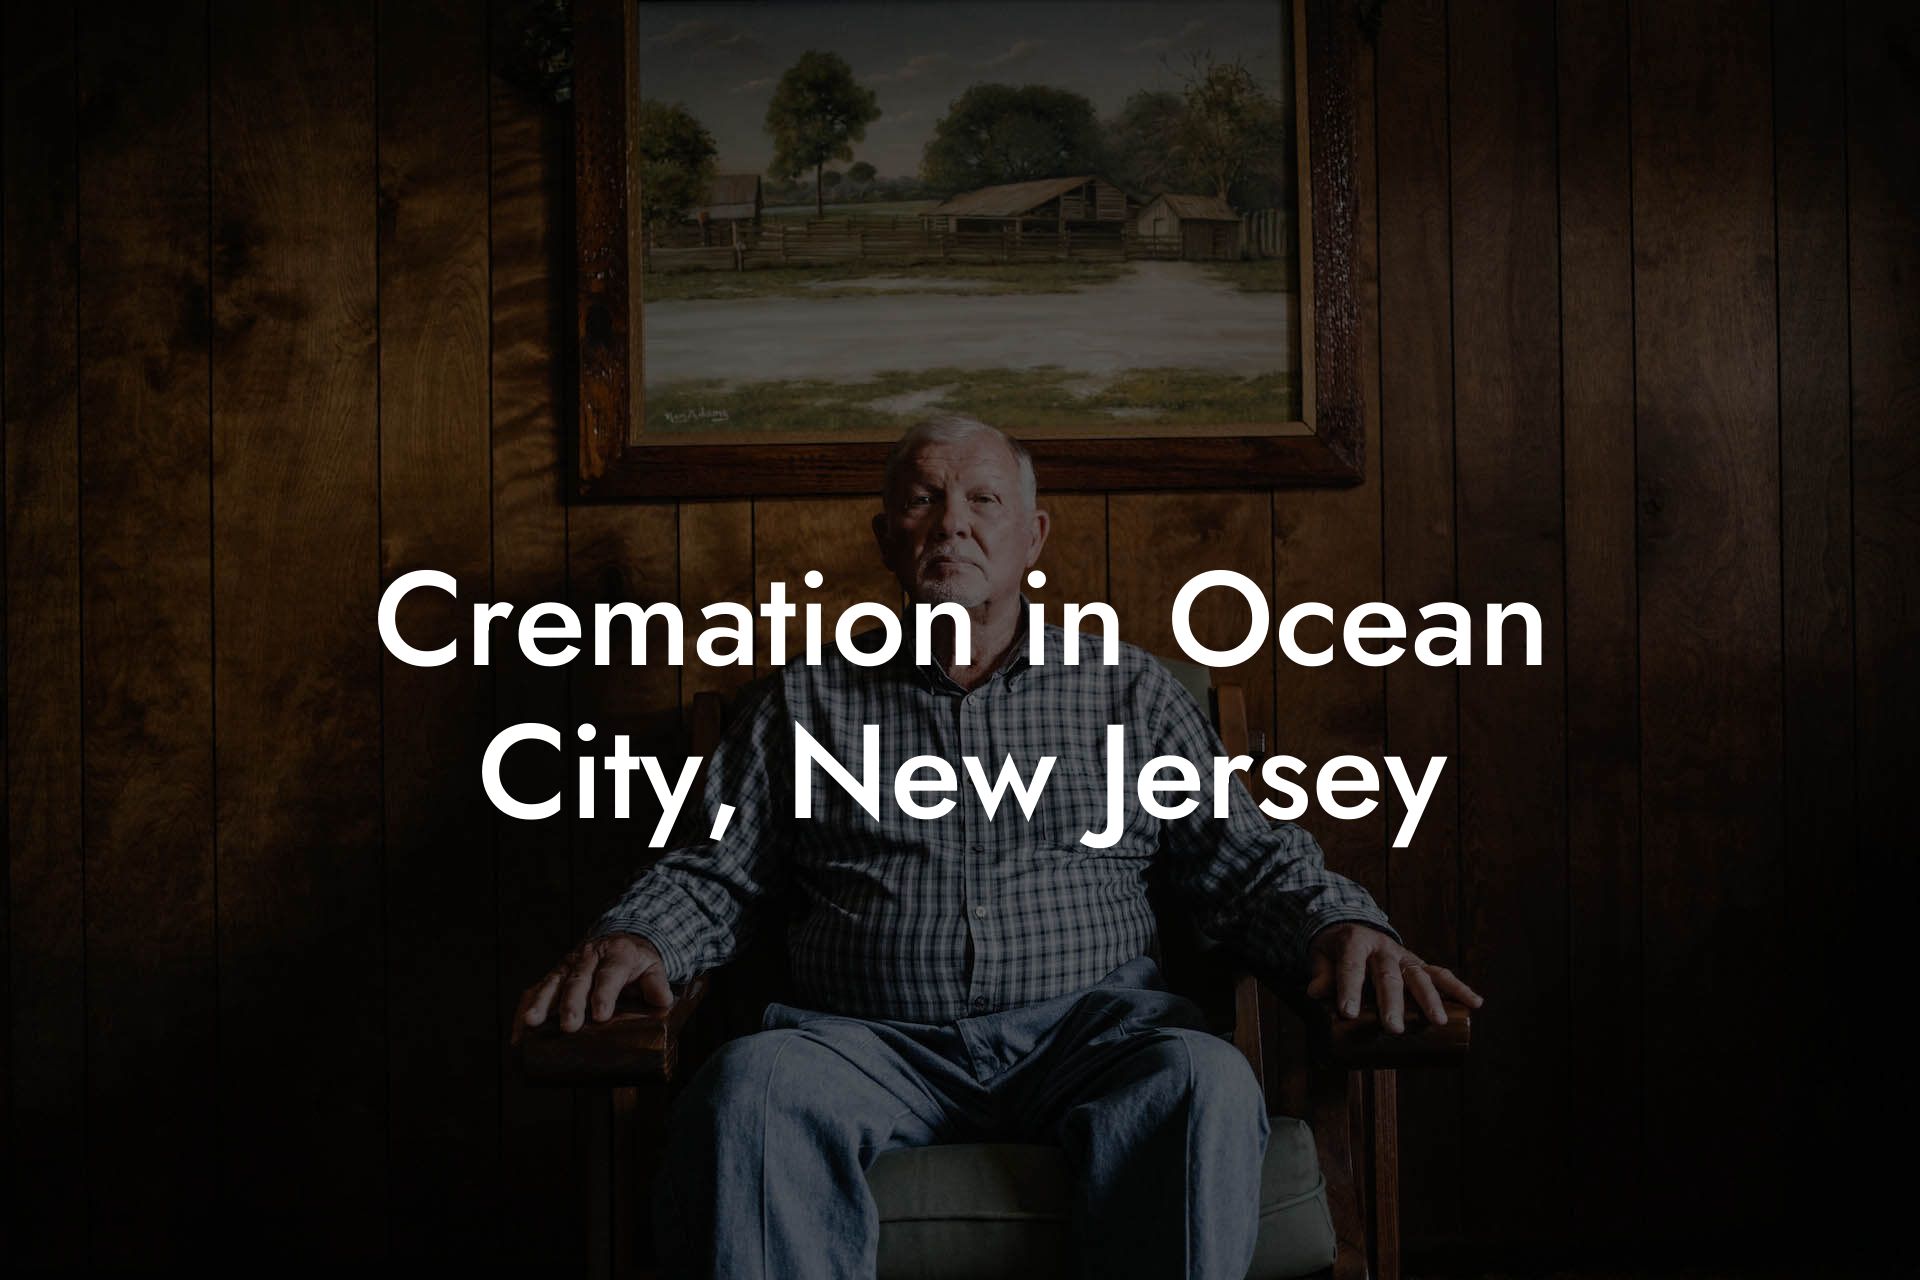 Cremation in Ocean City, New Jersey